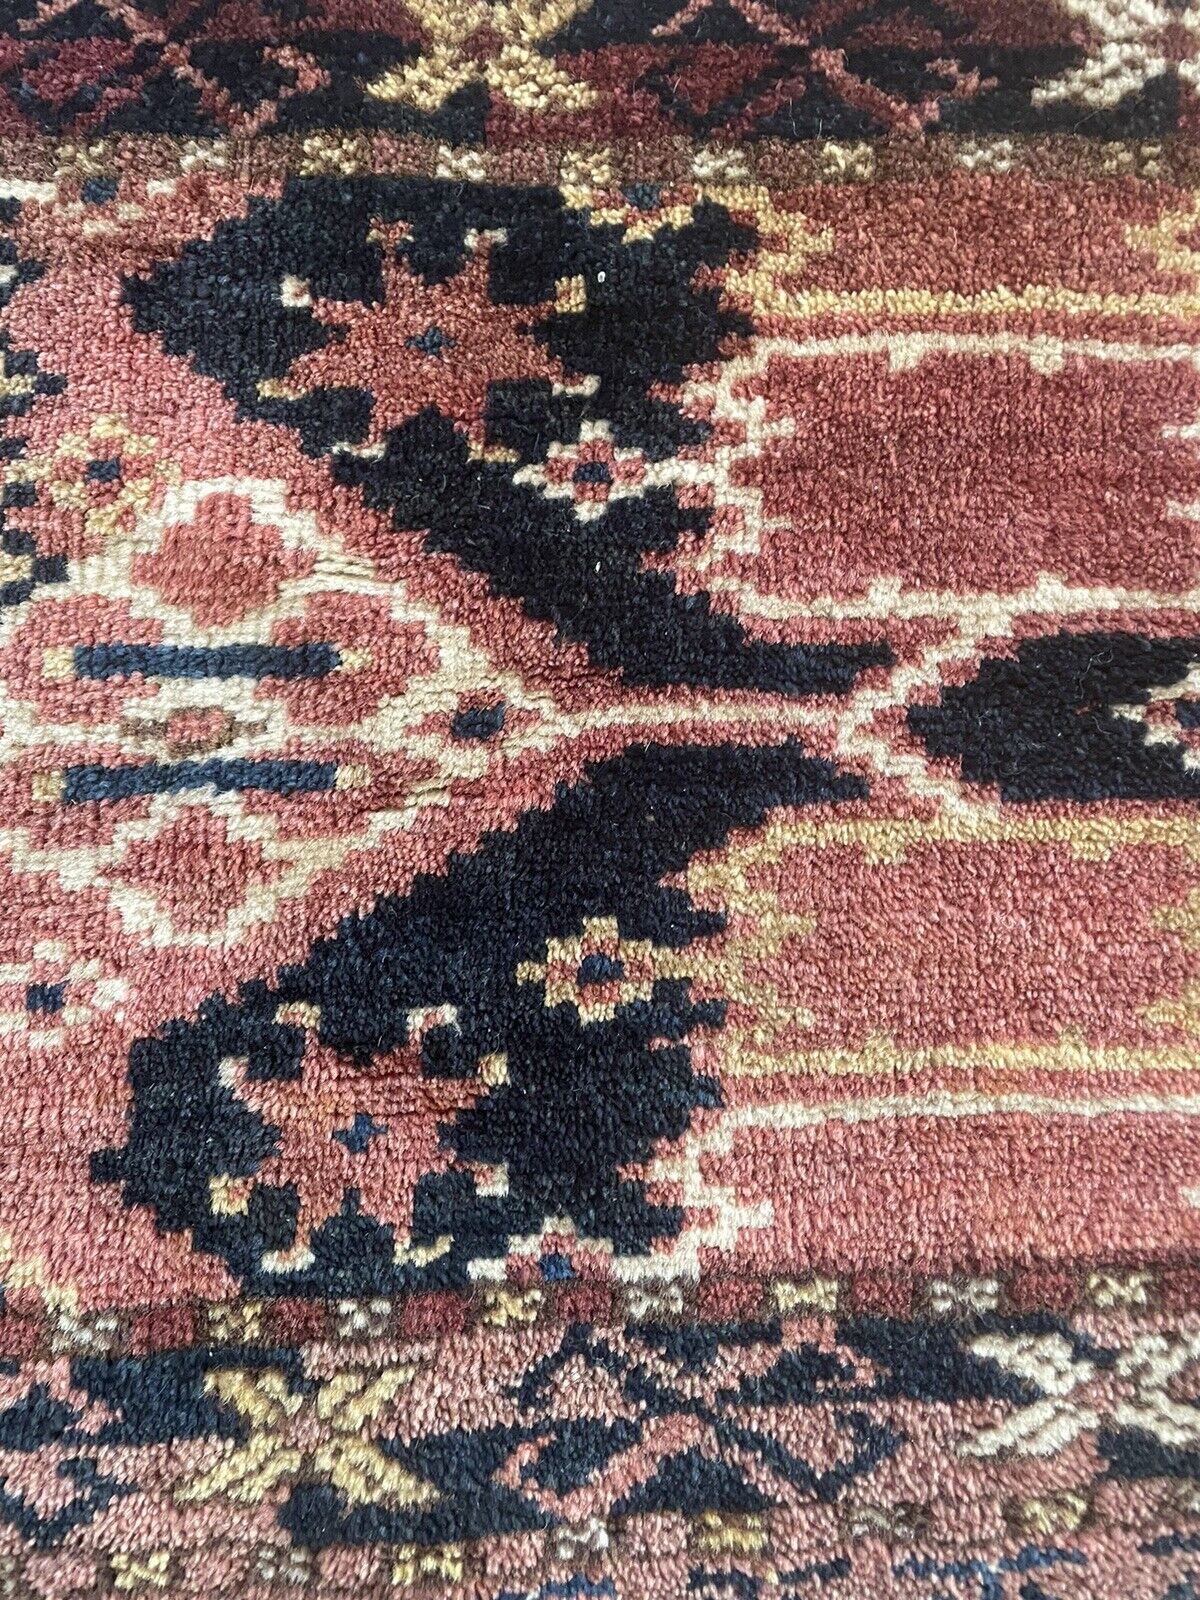 Close-up of color palette on Handmade Antique Afghan Beshir Collectible Chuval Rug - Detailed view showcasing the color palette of the rug, including red, black, and beige tones that create a harmonious visual appeal.